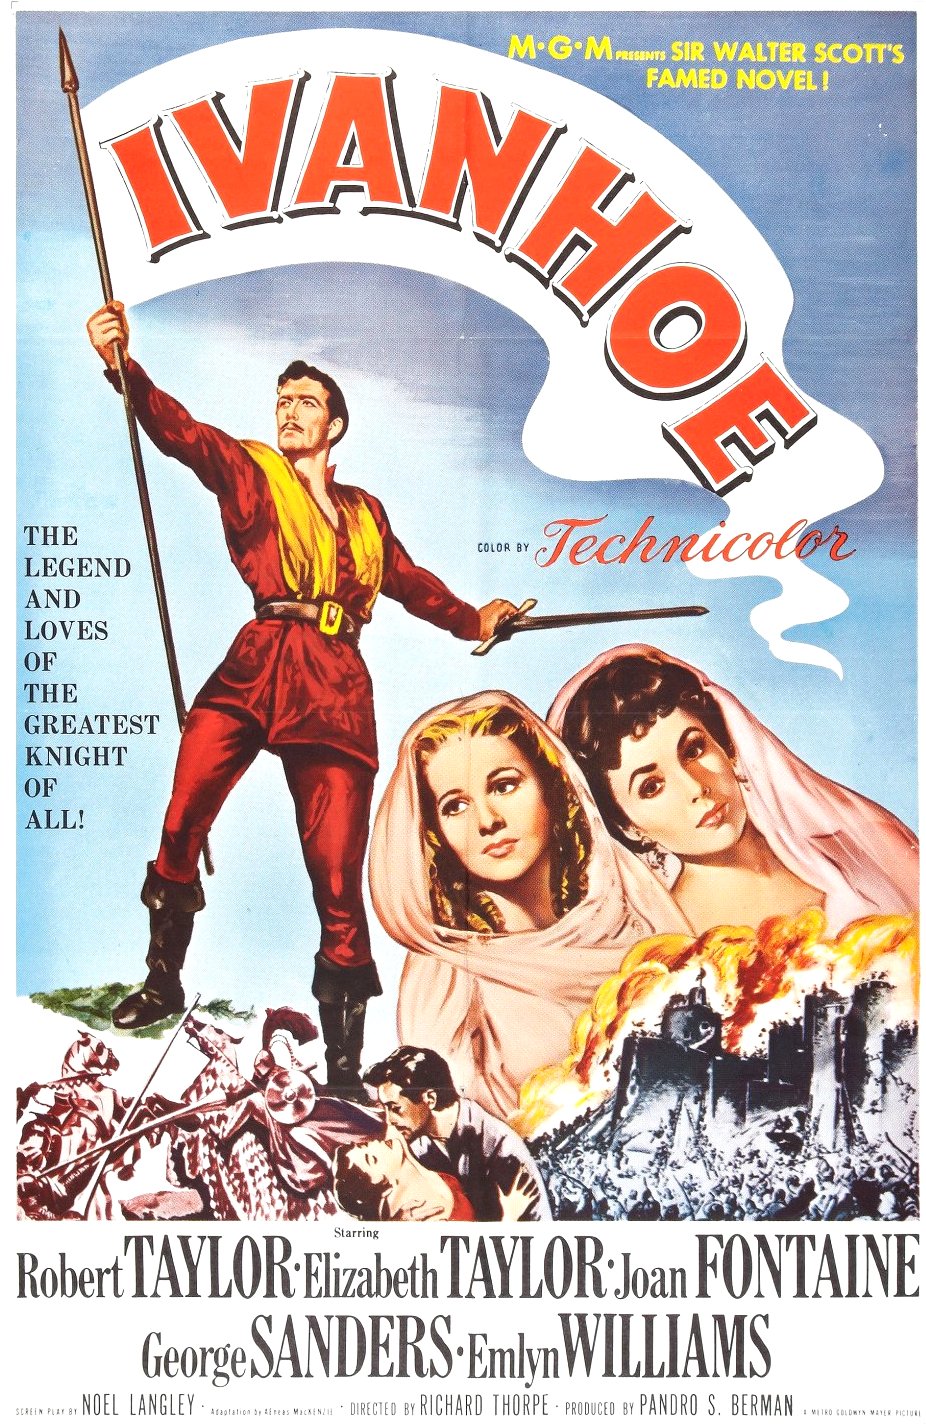 Ivanhoe (1952) Movie Poster from http://www.impawards.com/1952/posters/ivanhoe_xlg.jpg